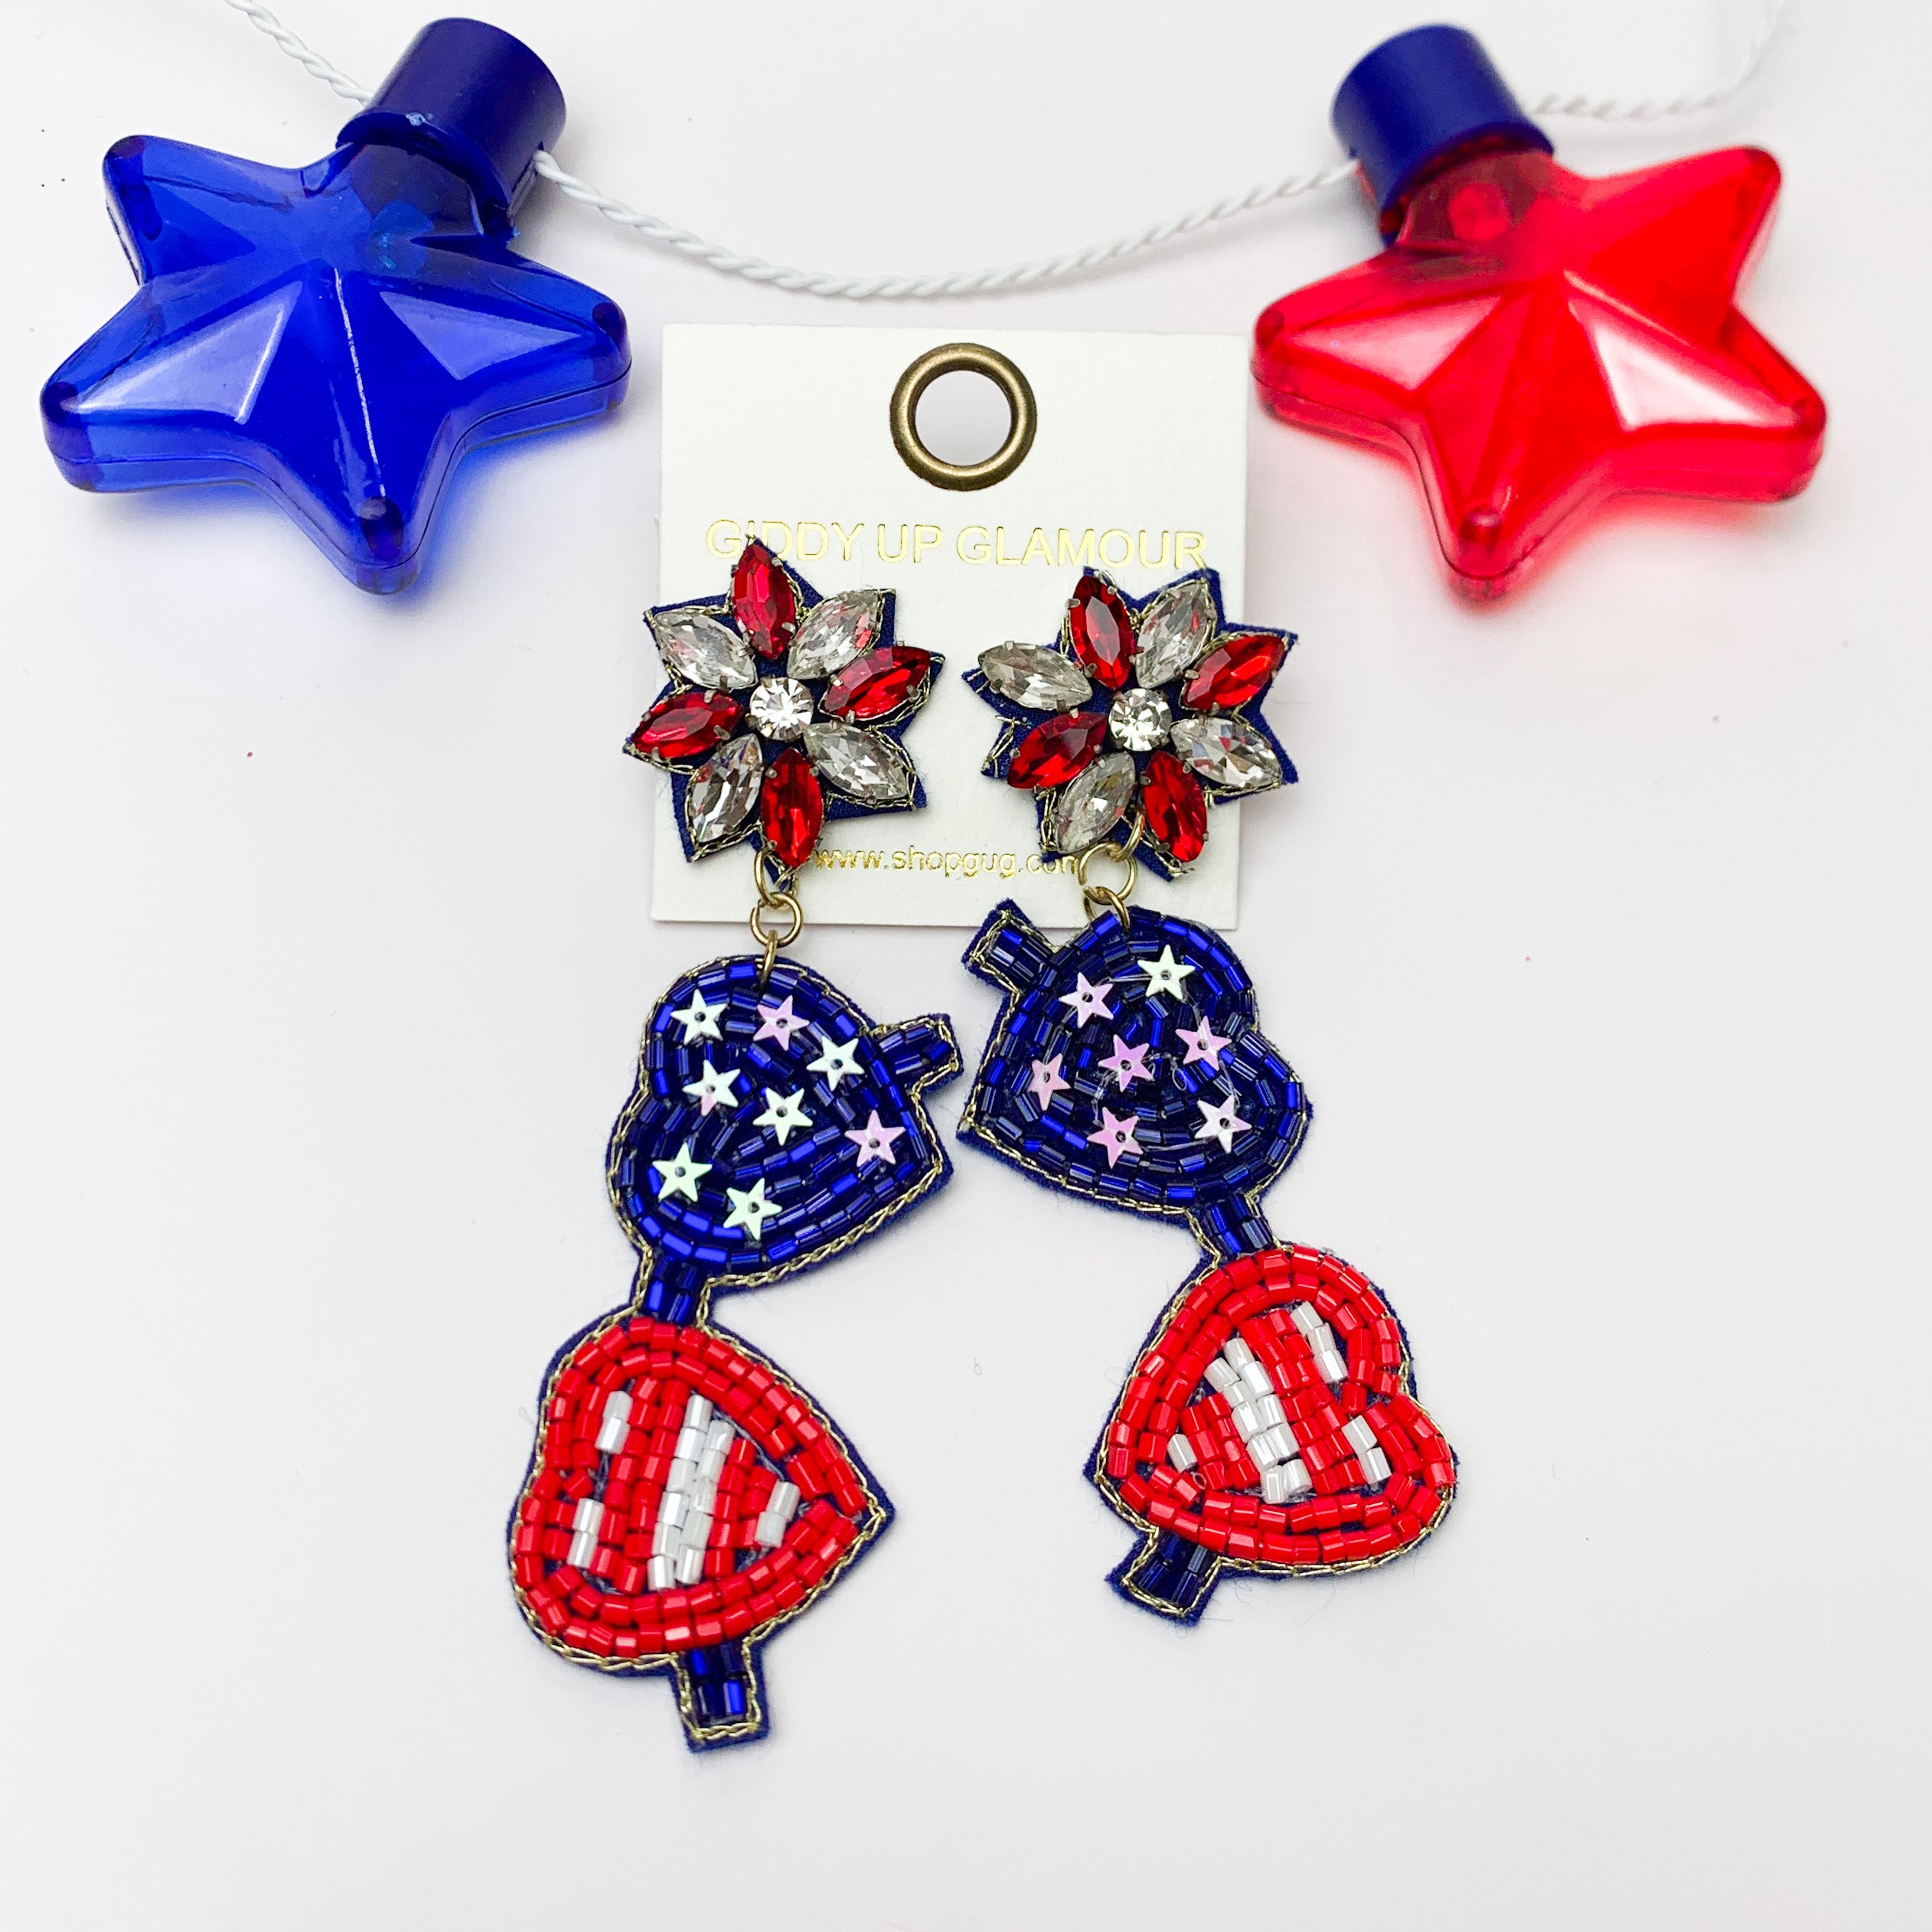 'Merica Stars and Stripes Sunglass Earrings. PIctured on a white background with a red and blue star above for decoration.